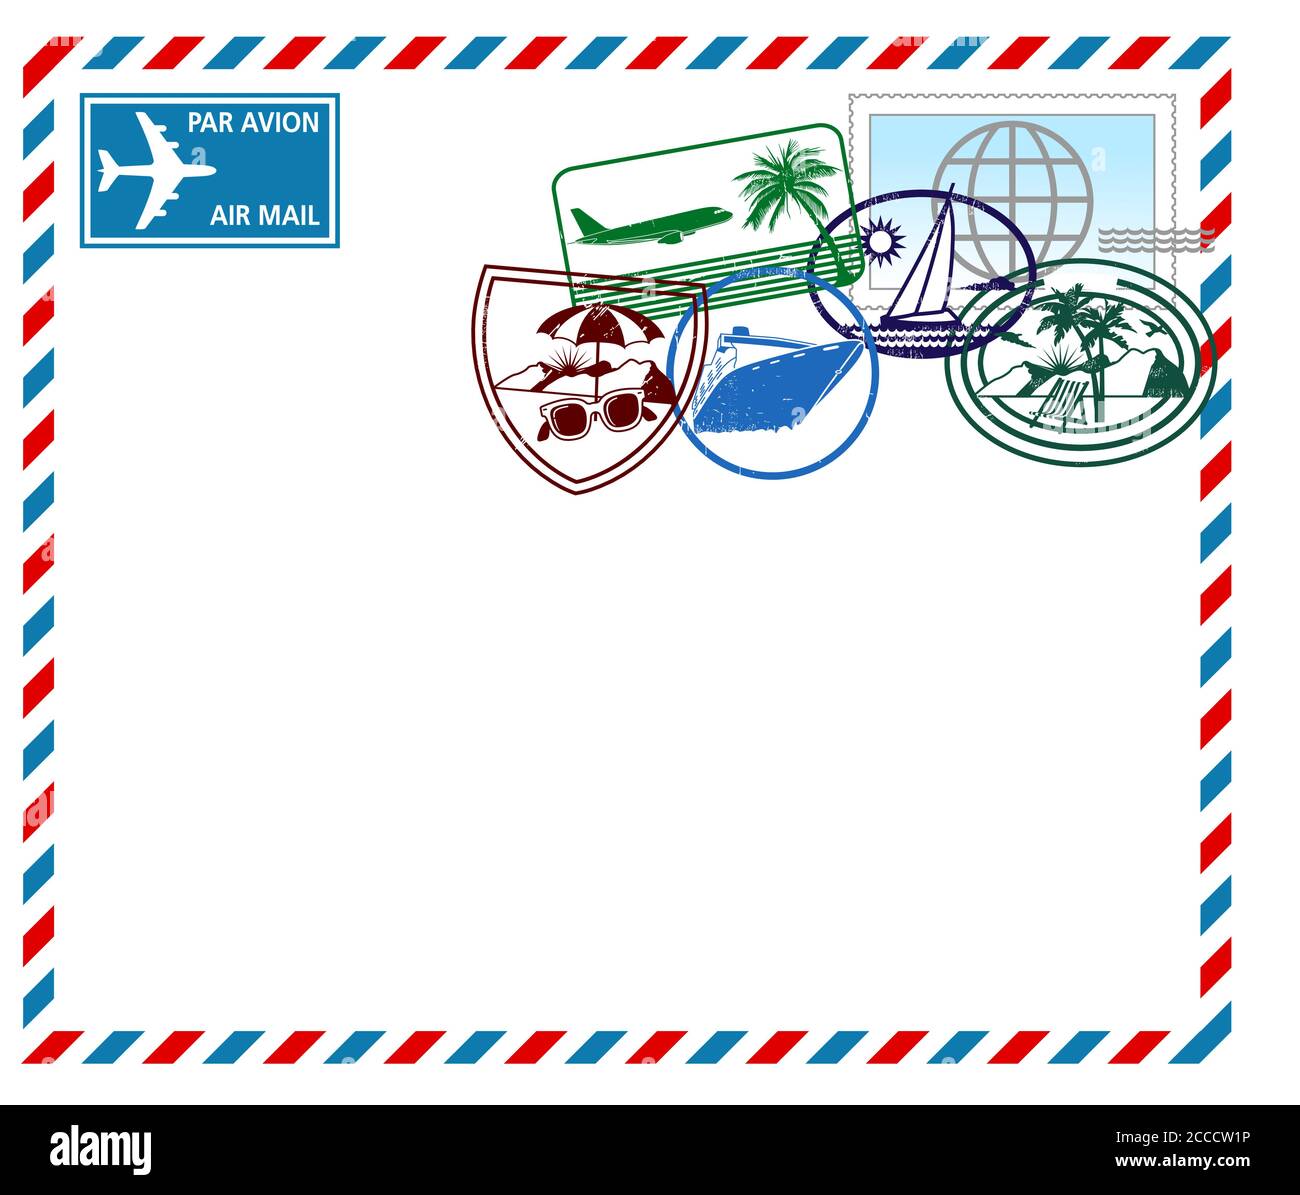 Airmail envelope with postmark - vector illustration Stock Vector